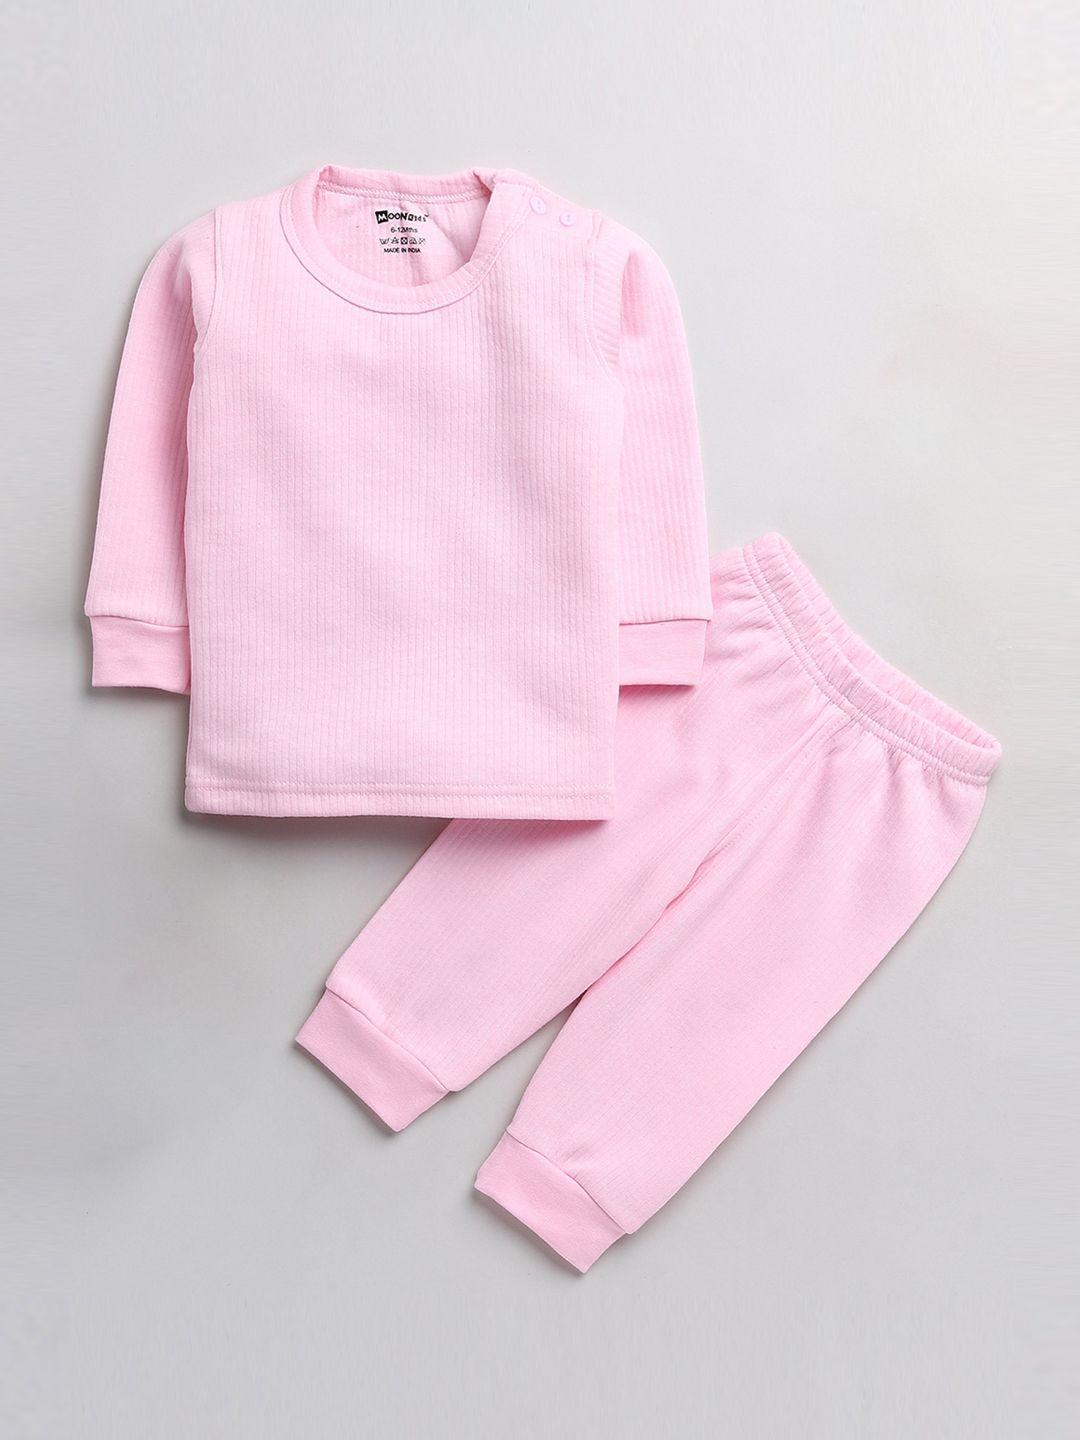 moonkids boys pink solid cotton thermal set